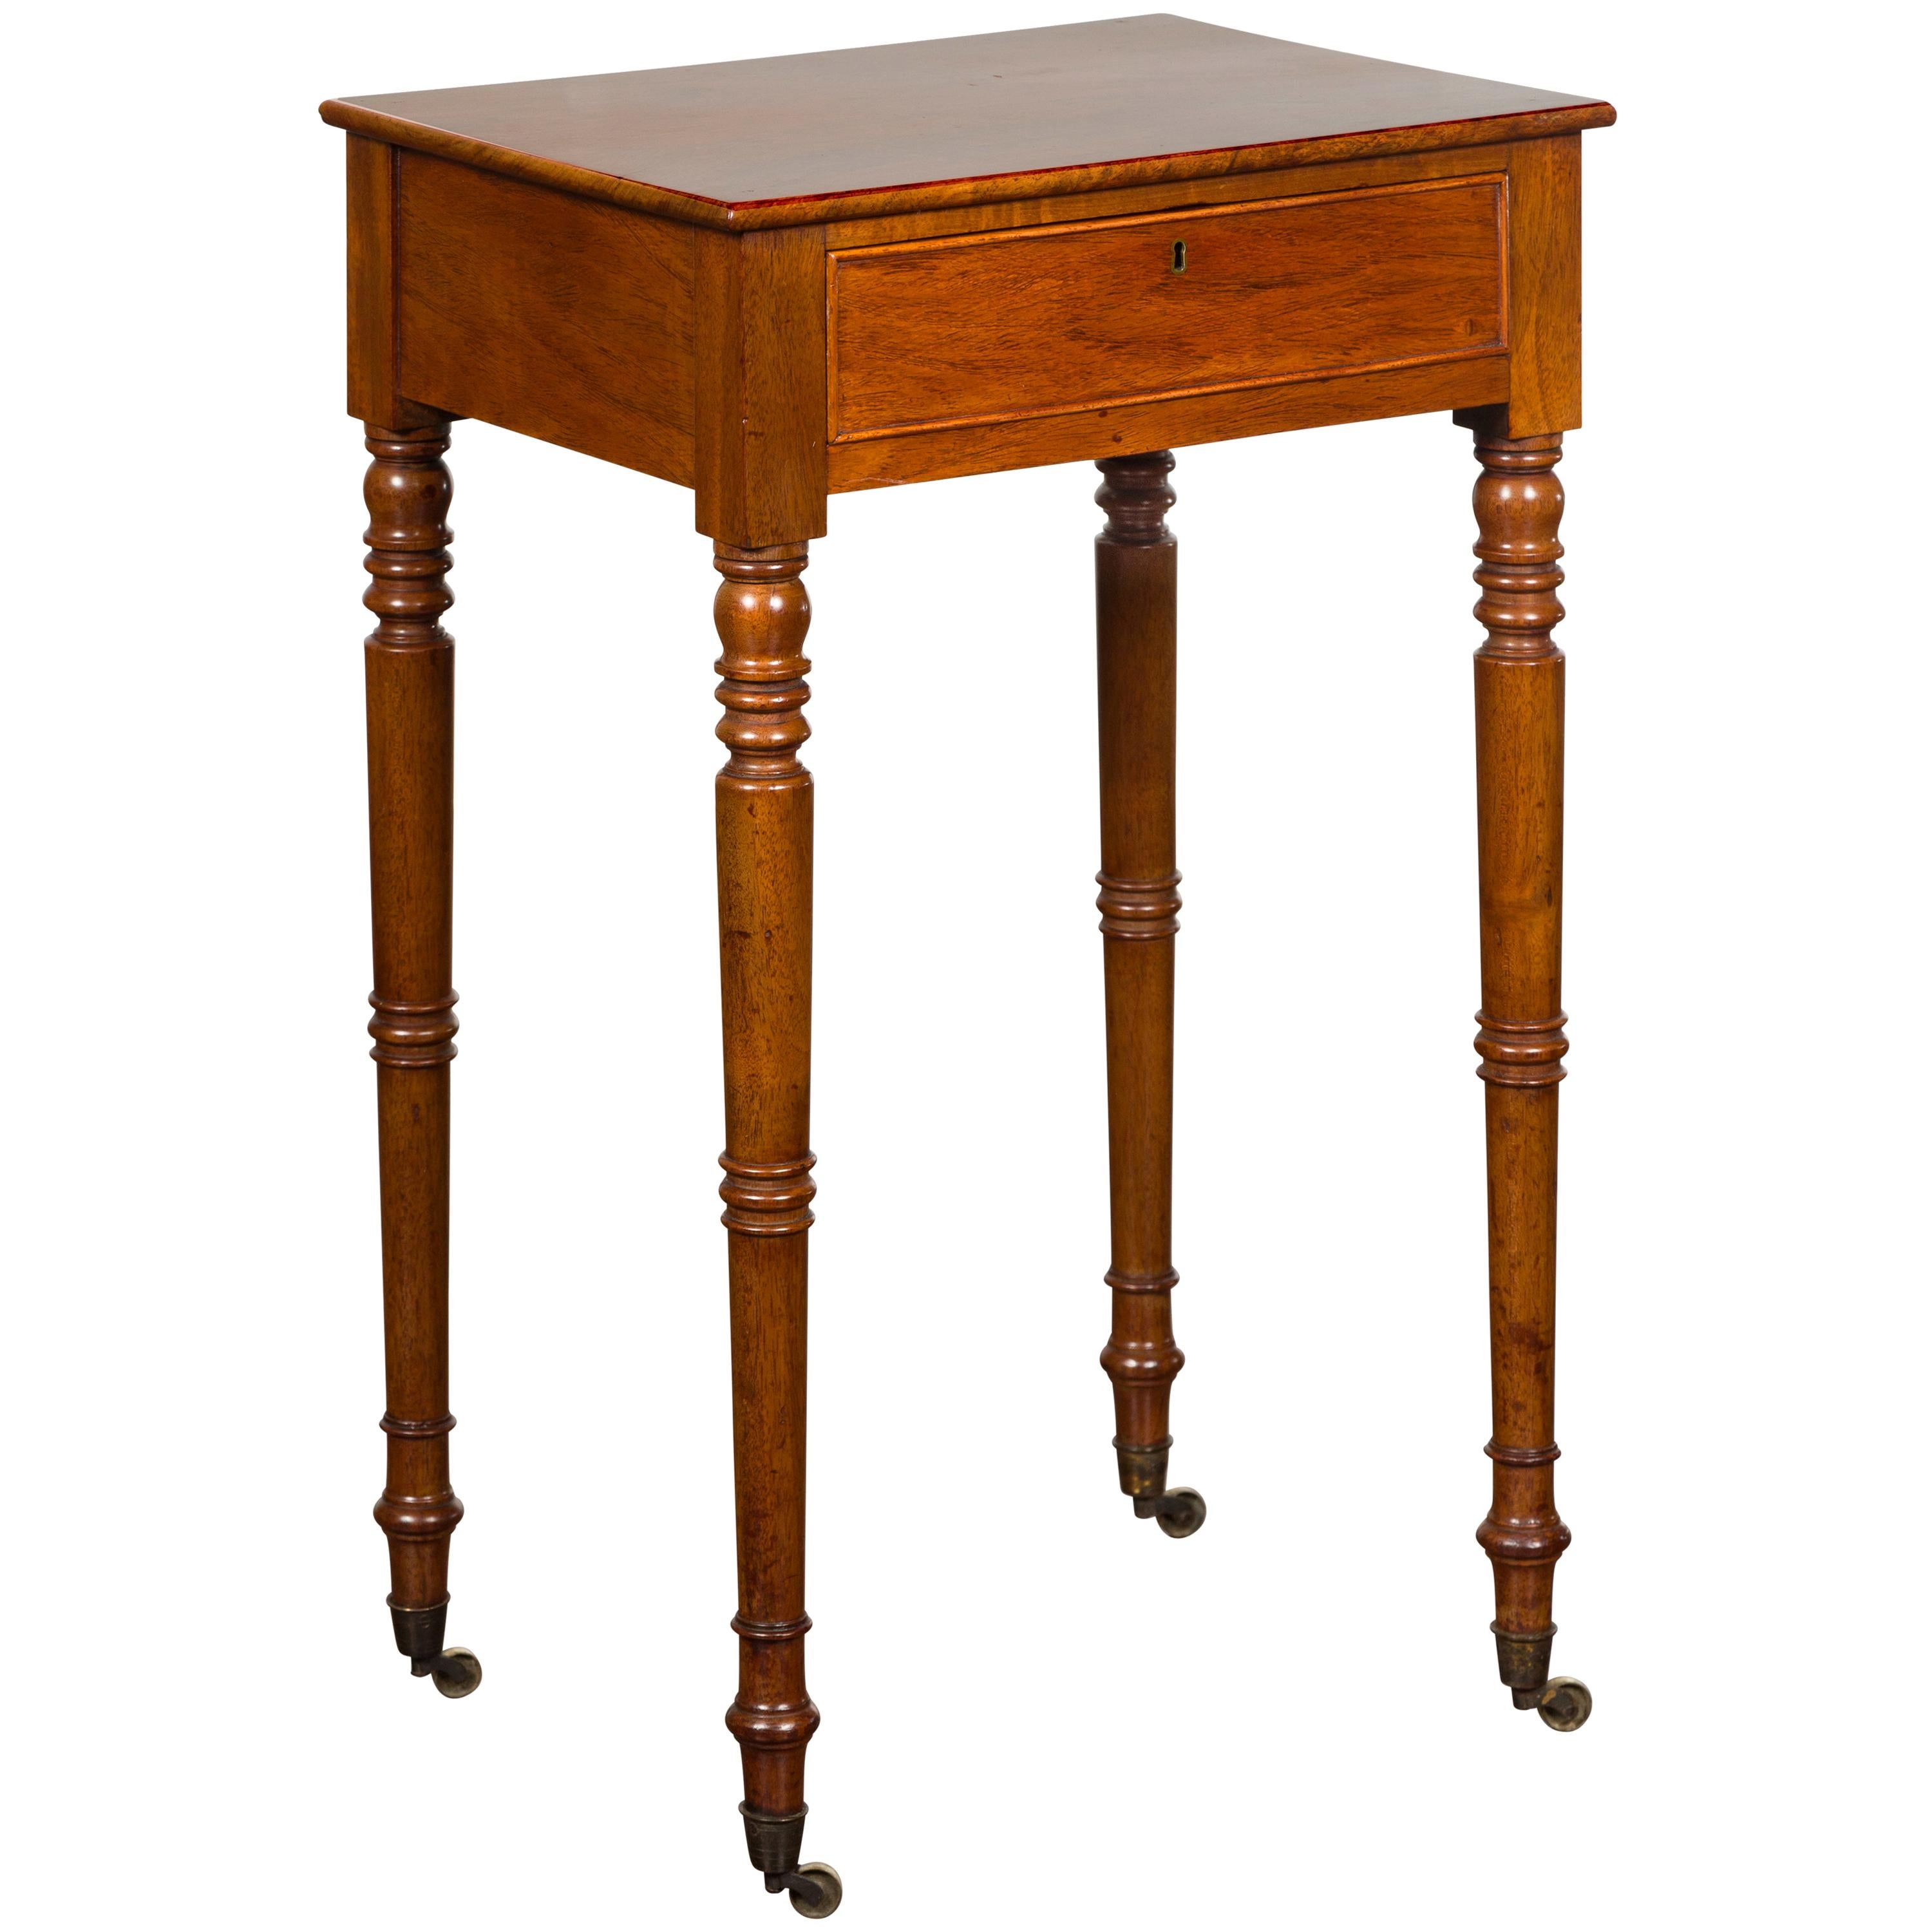 English 1820s Walnut Side Table with Single Drawer, Turned Legs and Casters For Sale